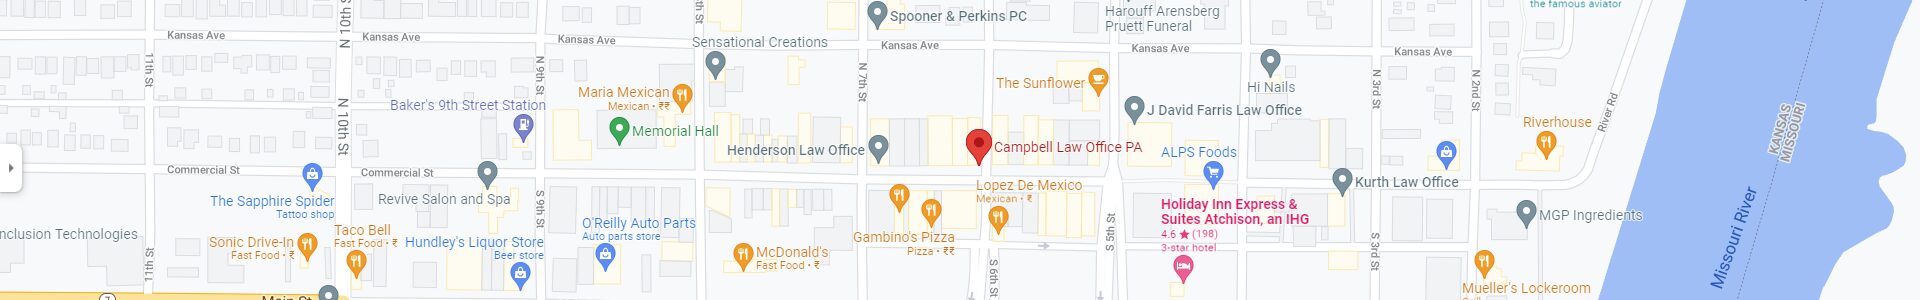 Campbell Law Office, P.A.